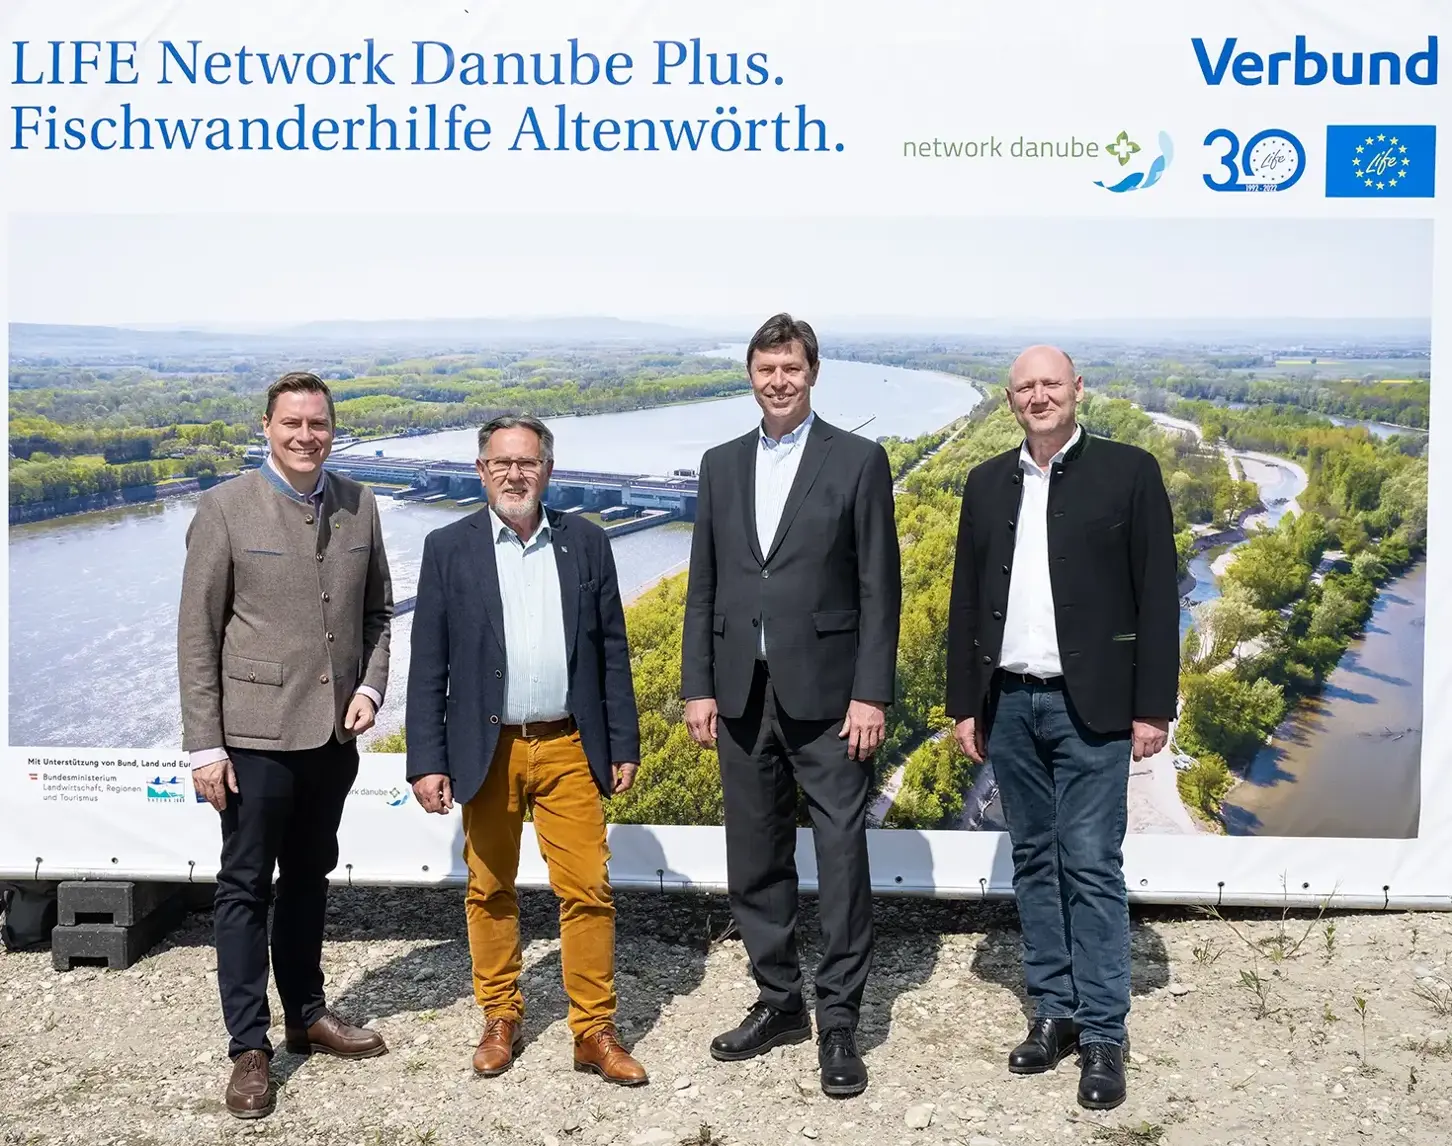 VERBUND and its project partners opened the Altenwörth fish migration aid in the presence of numerous guests.